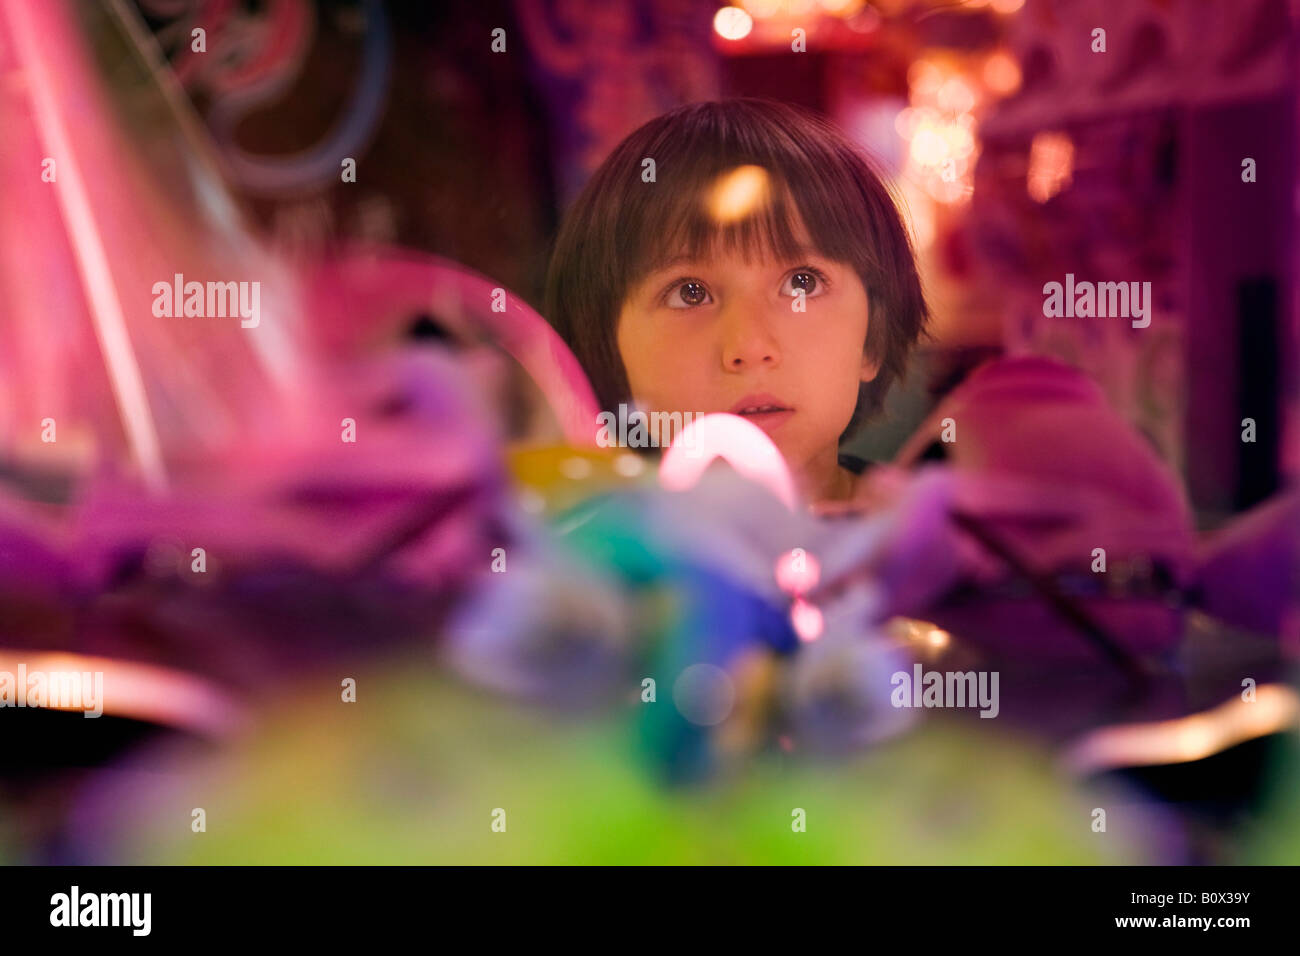 A boy surrounded by colorful lights Stock Photo